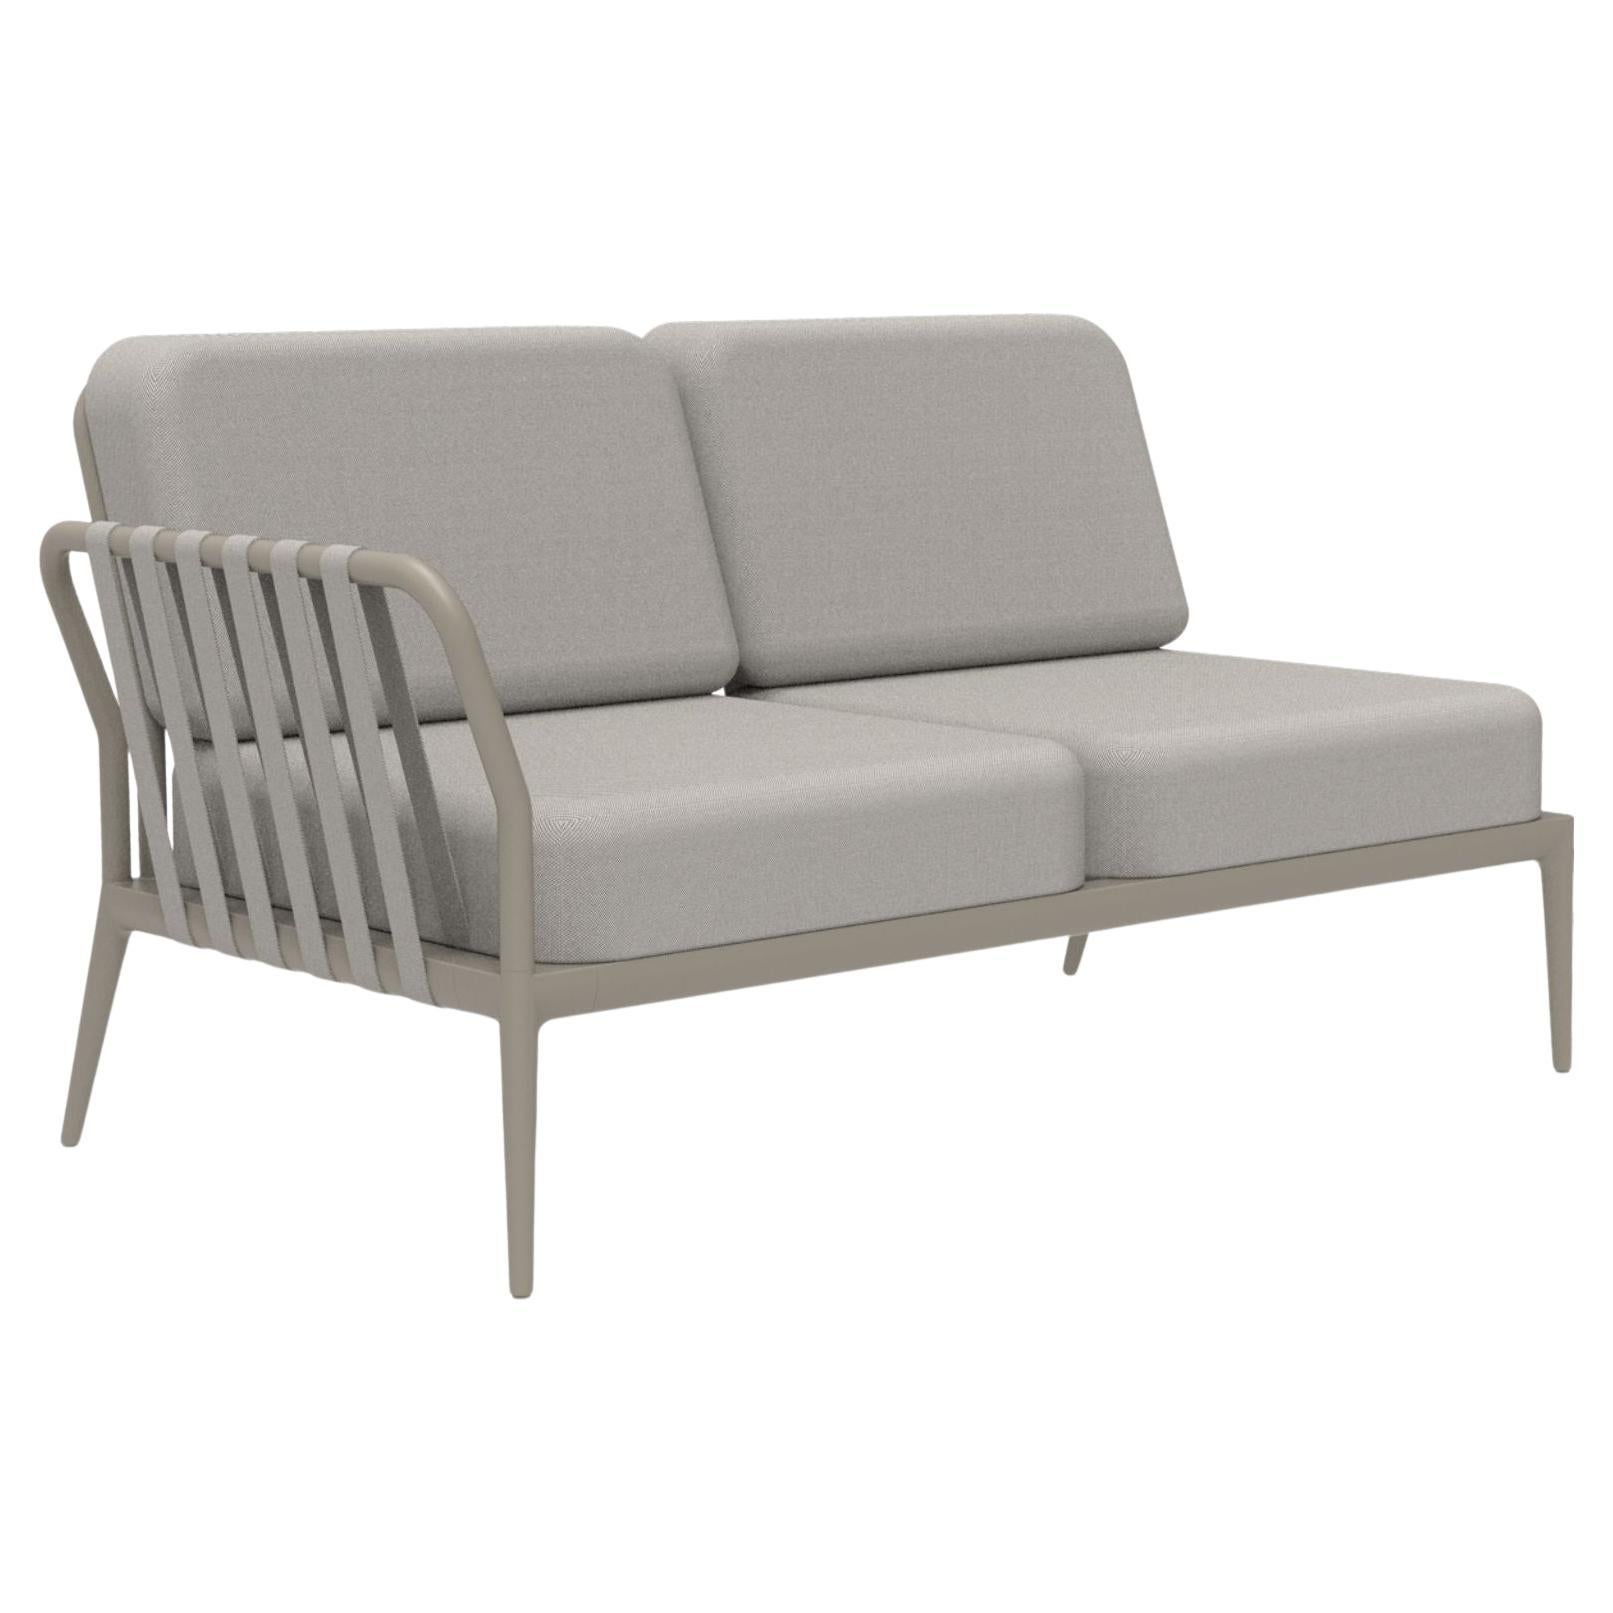 Ribbons Cream Double Right Modular Sofa by Mowee For Sale